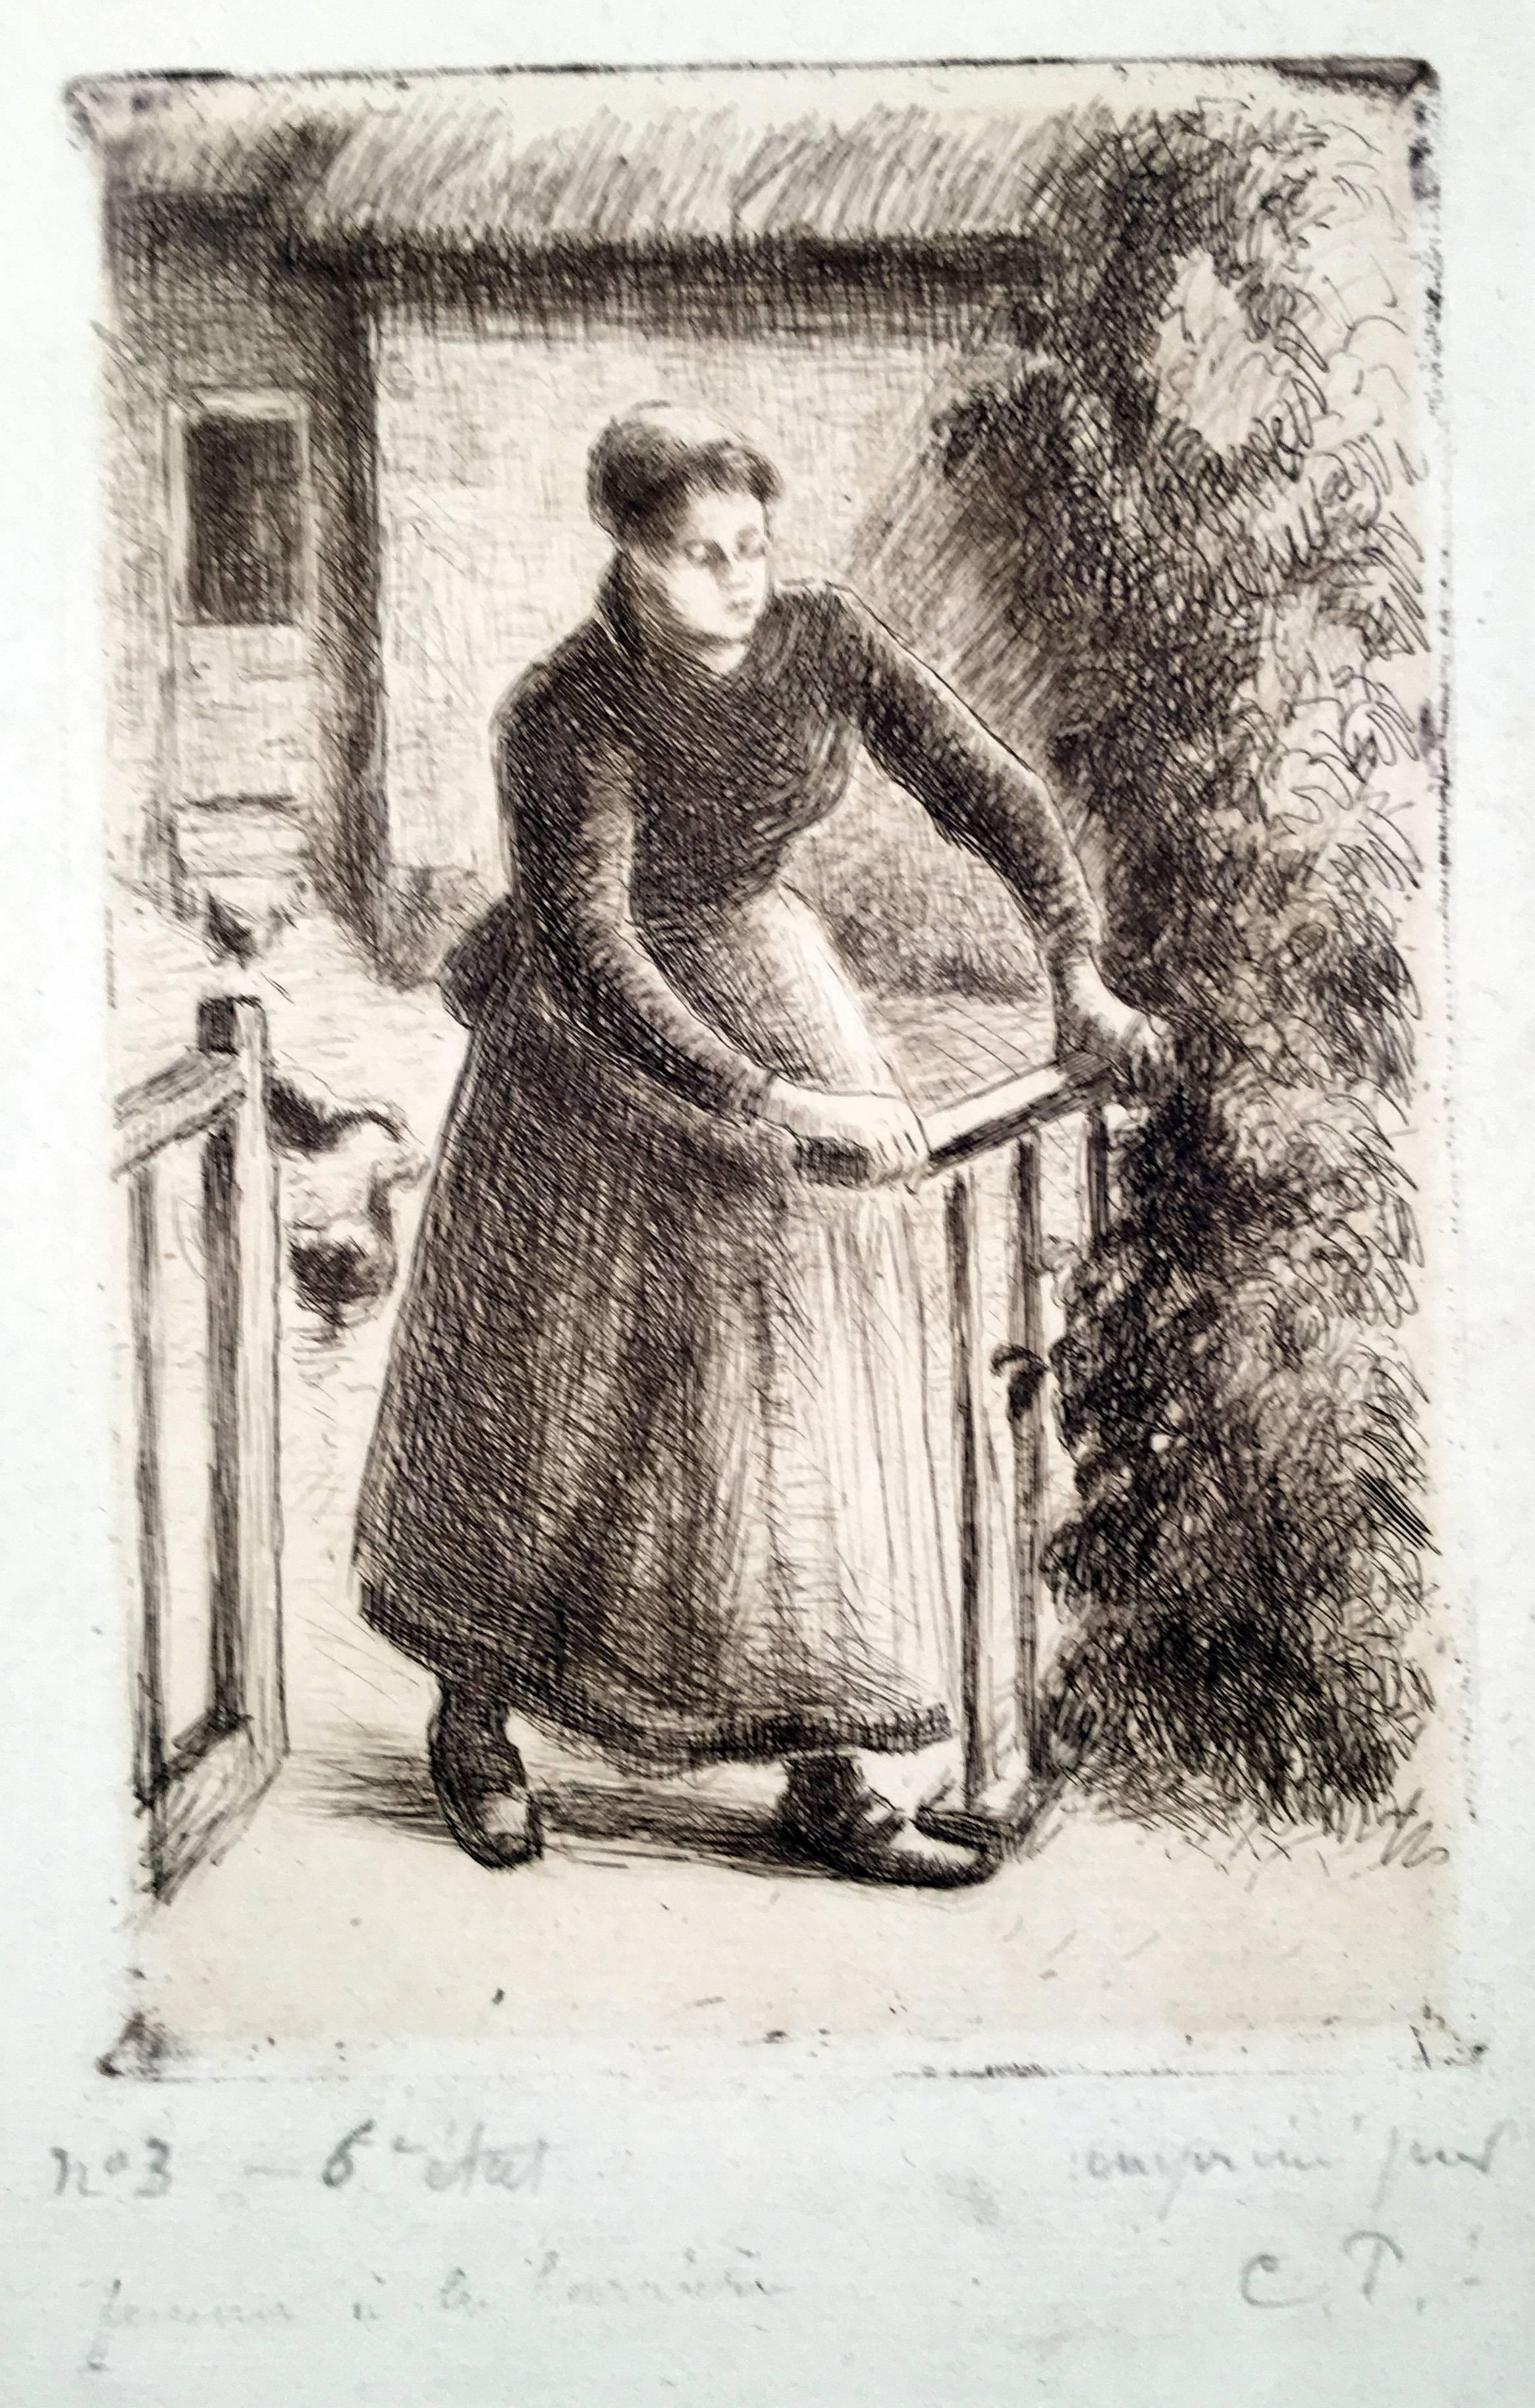 Femme a la Barriere (Woman at the Gate) - Print by Camille Pissarro